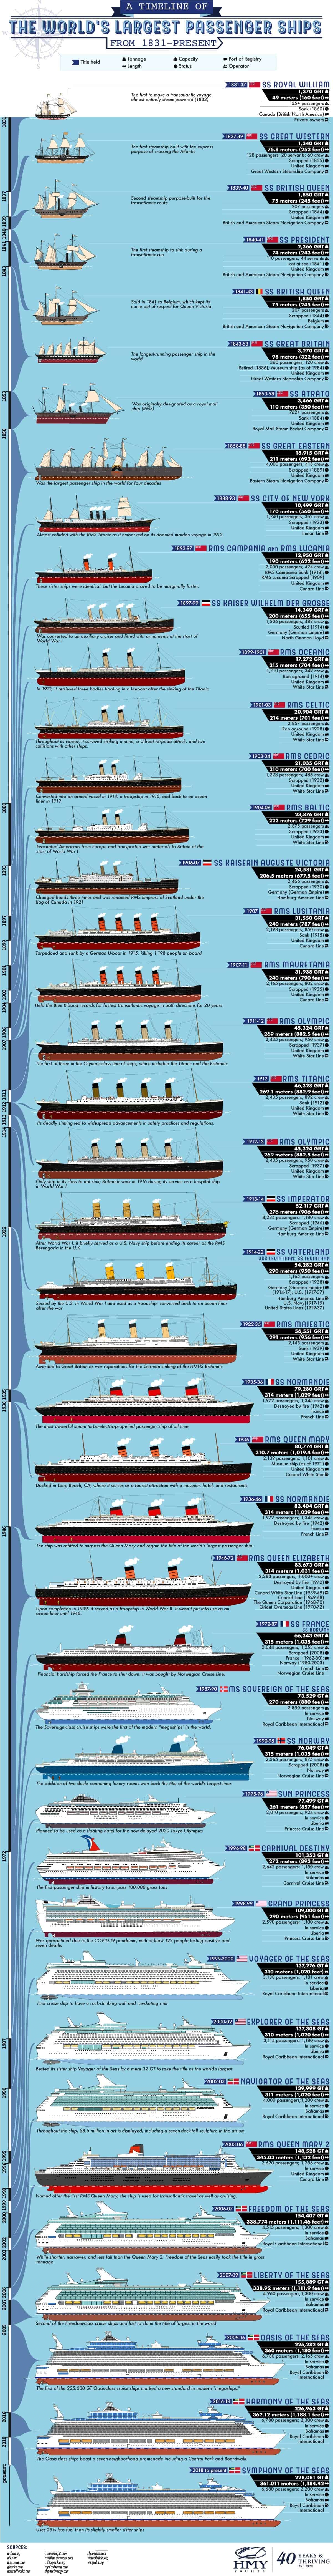 A Timeline of the World's Largest Passenger Ships From 1831-Present